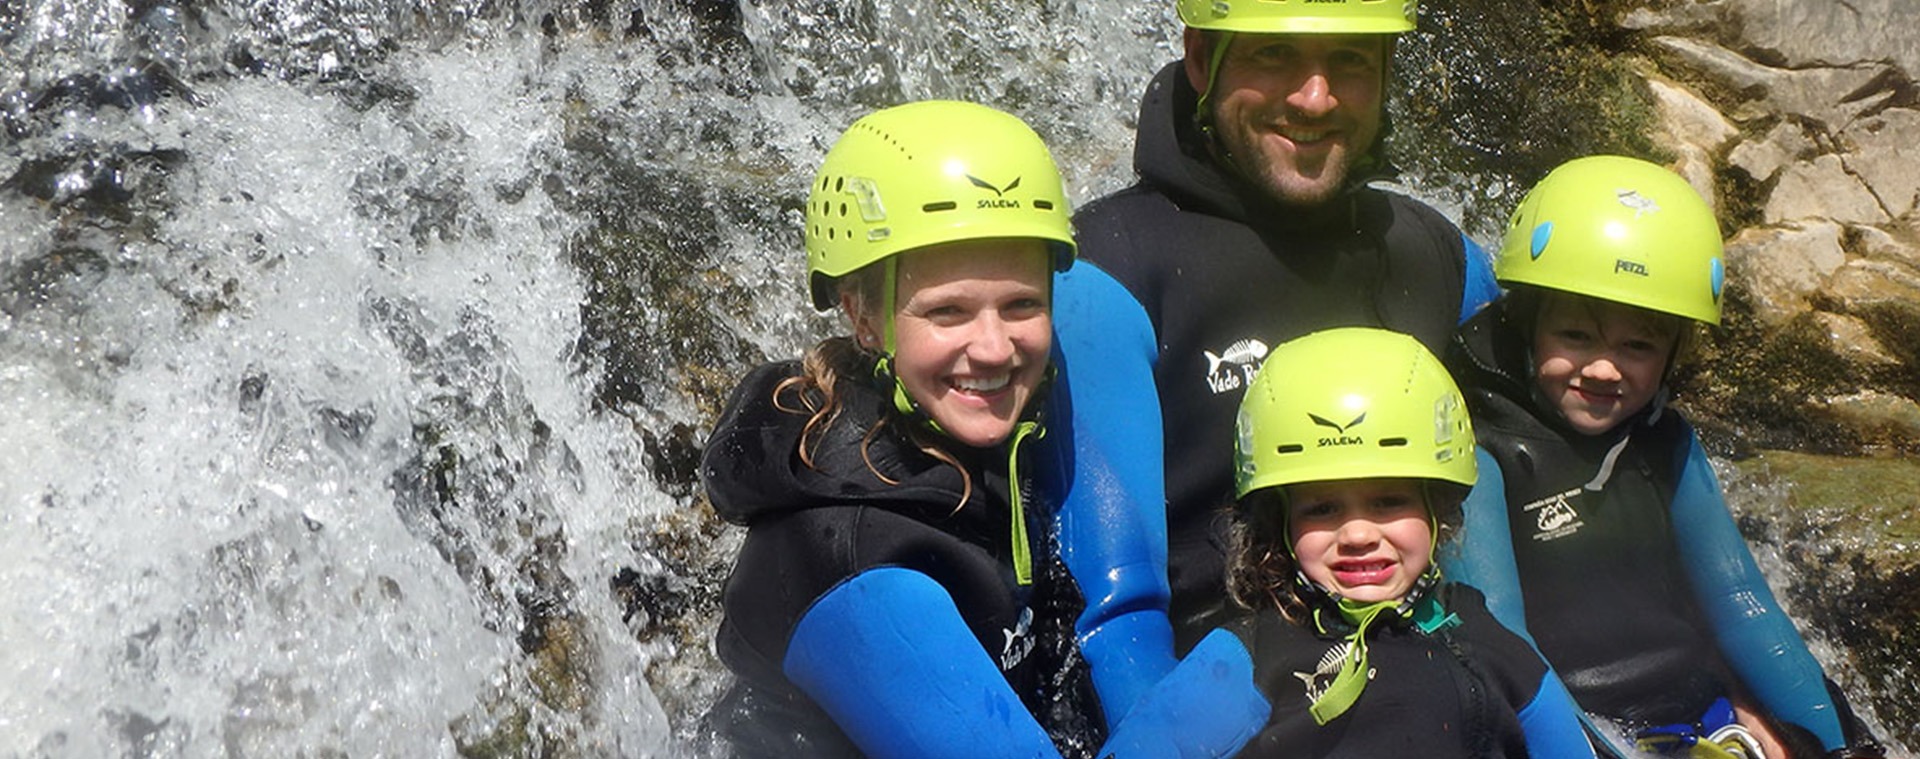 Canyoneering in the Pyrenees family